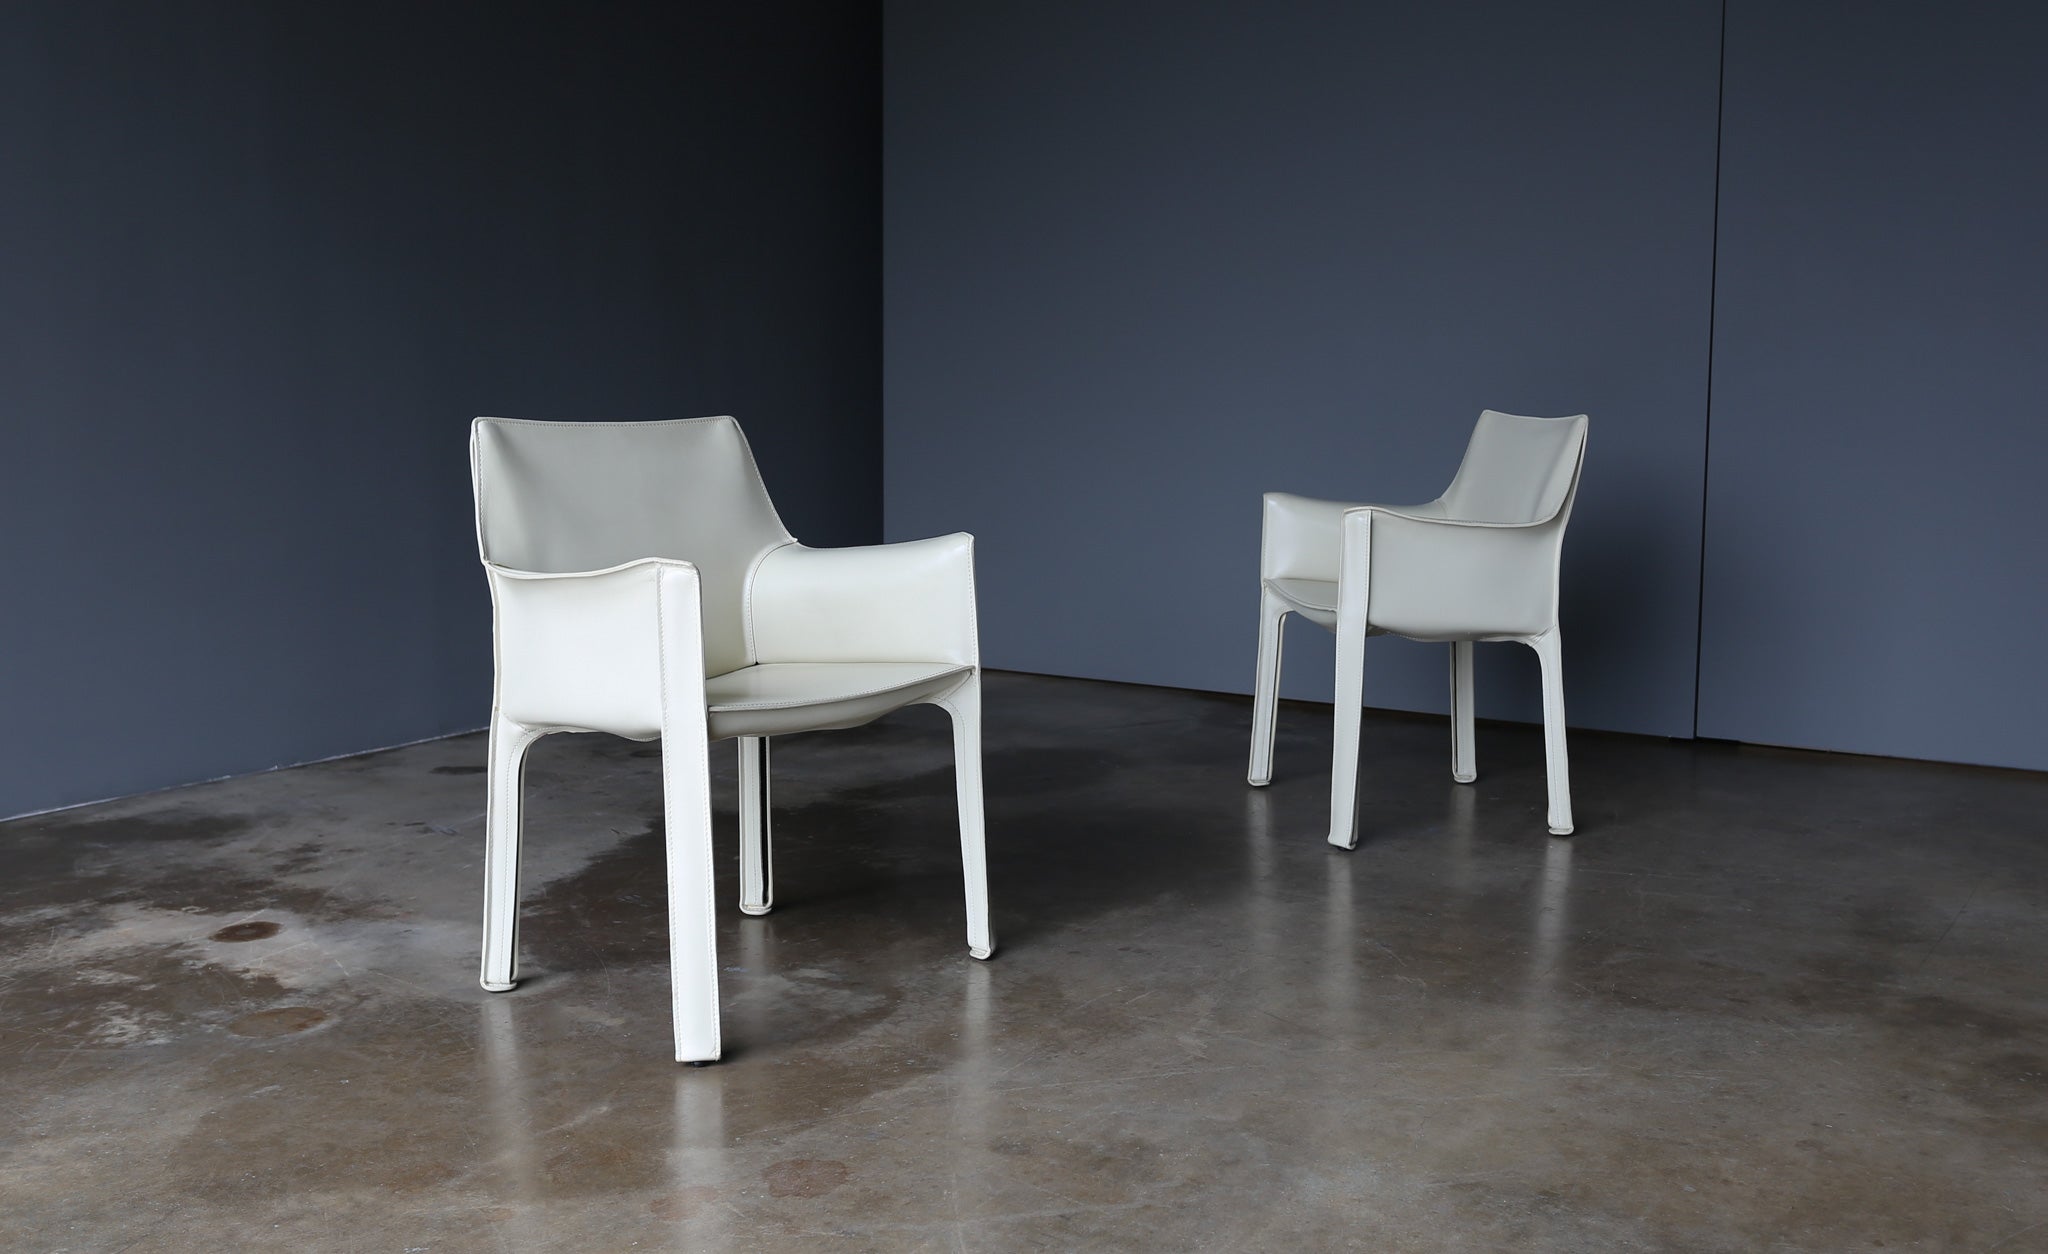 Mario Bellini Leather "Cab" Chairs for Cassina